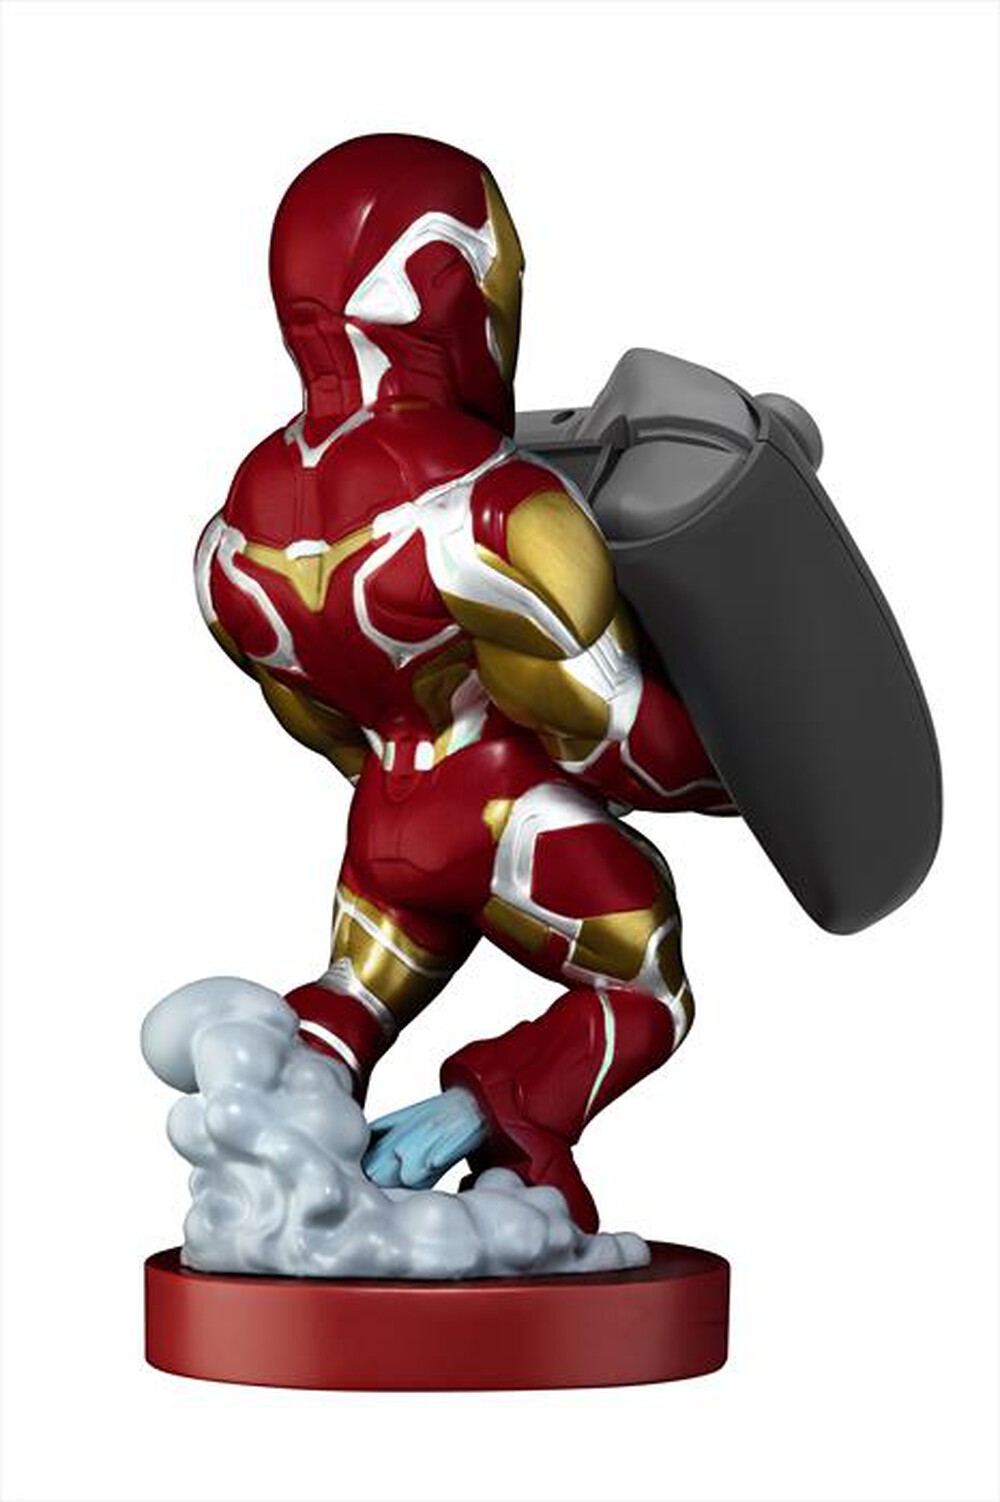 "EXQUISITE GAMING - IRONMAN CABLE GUY"